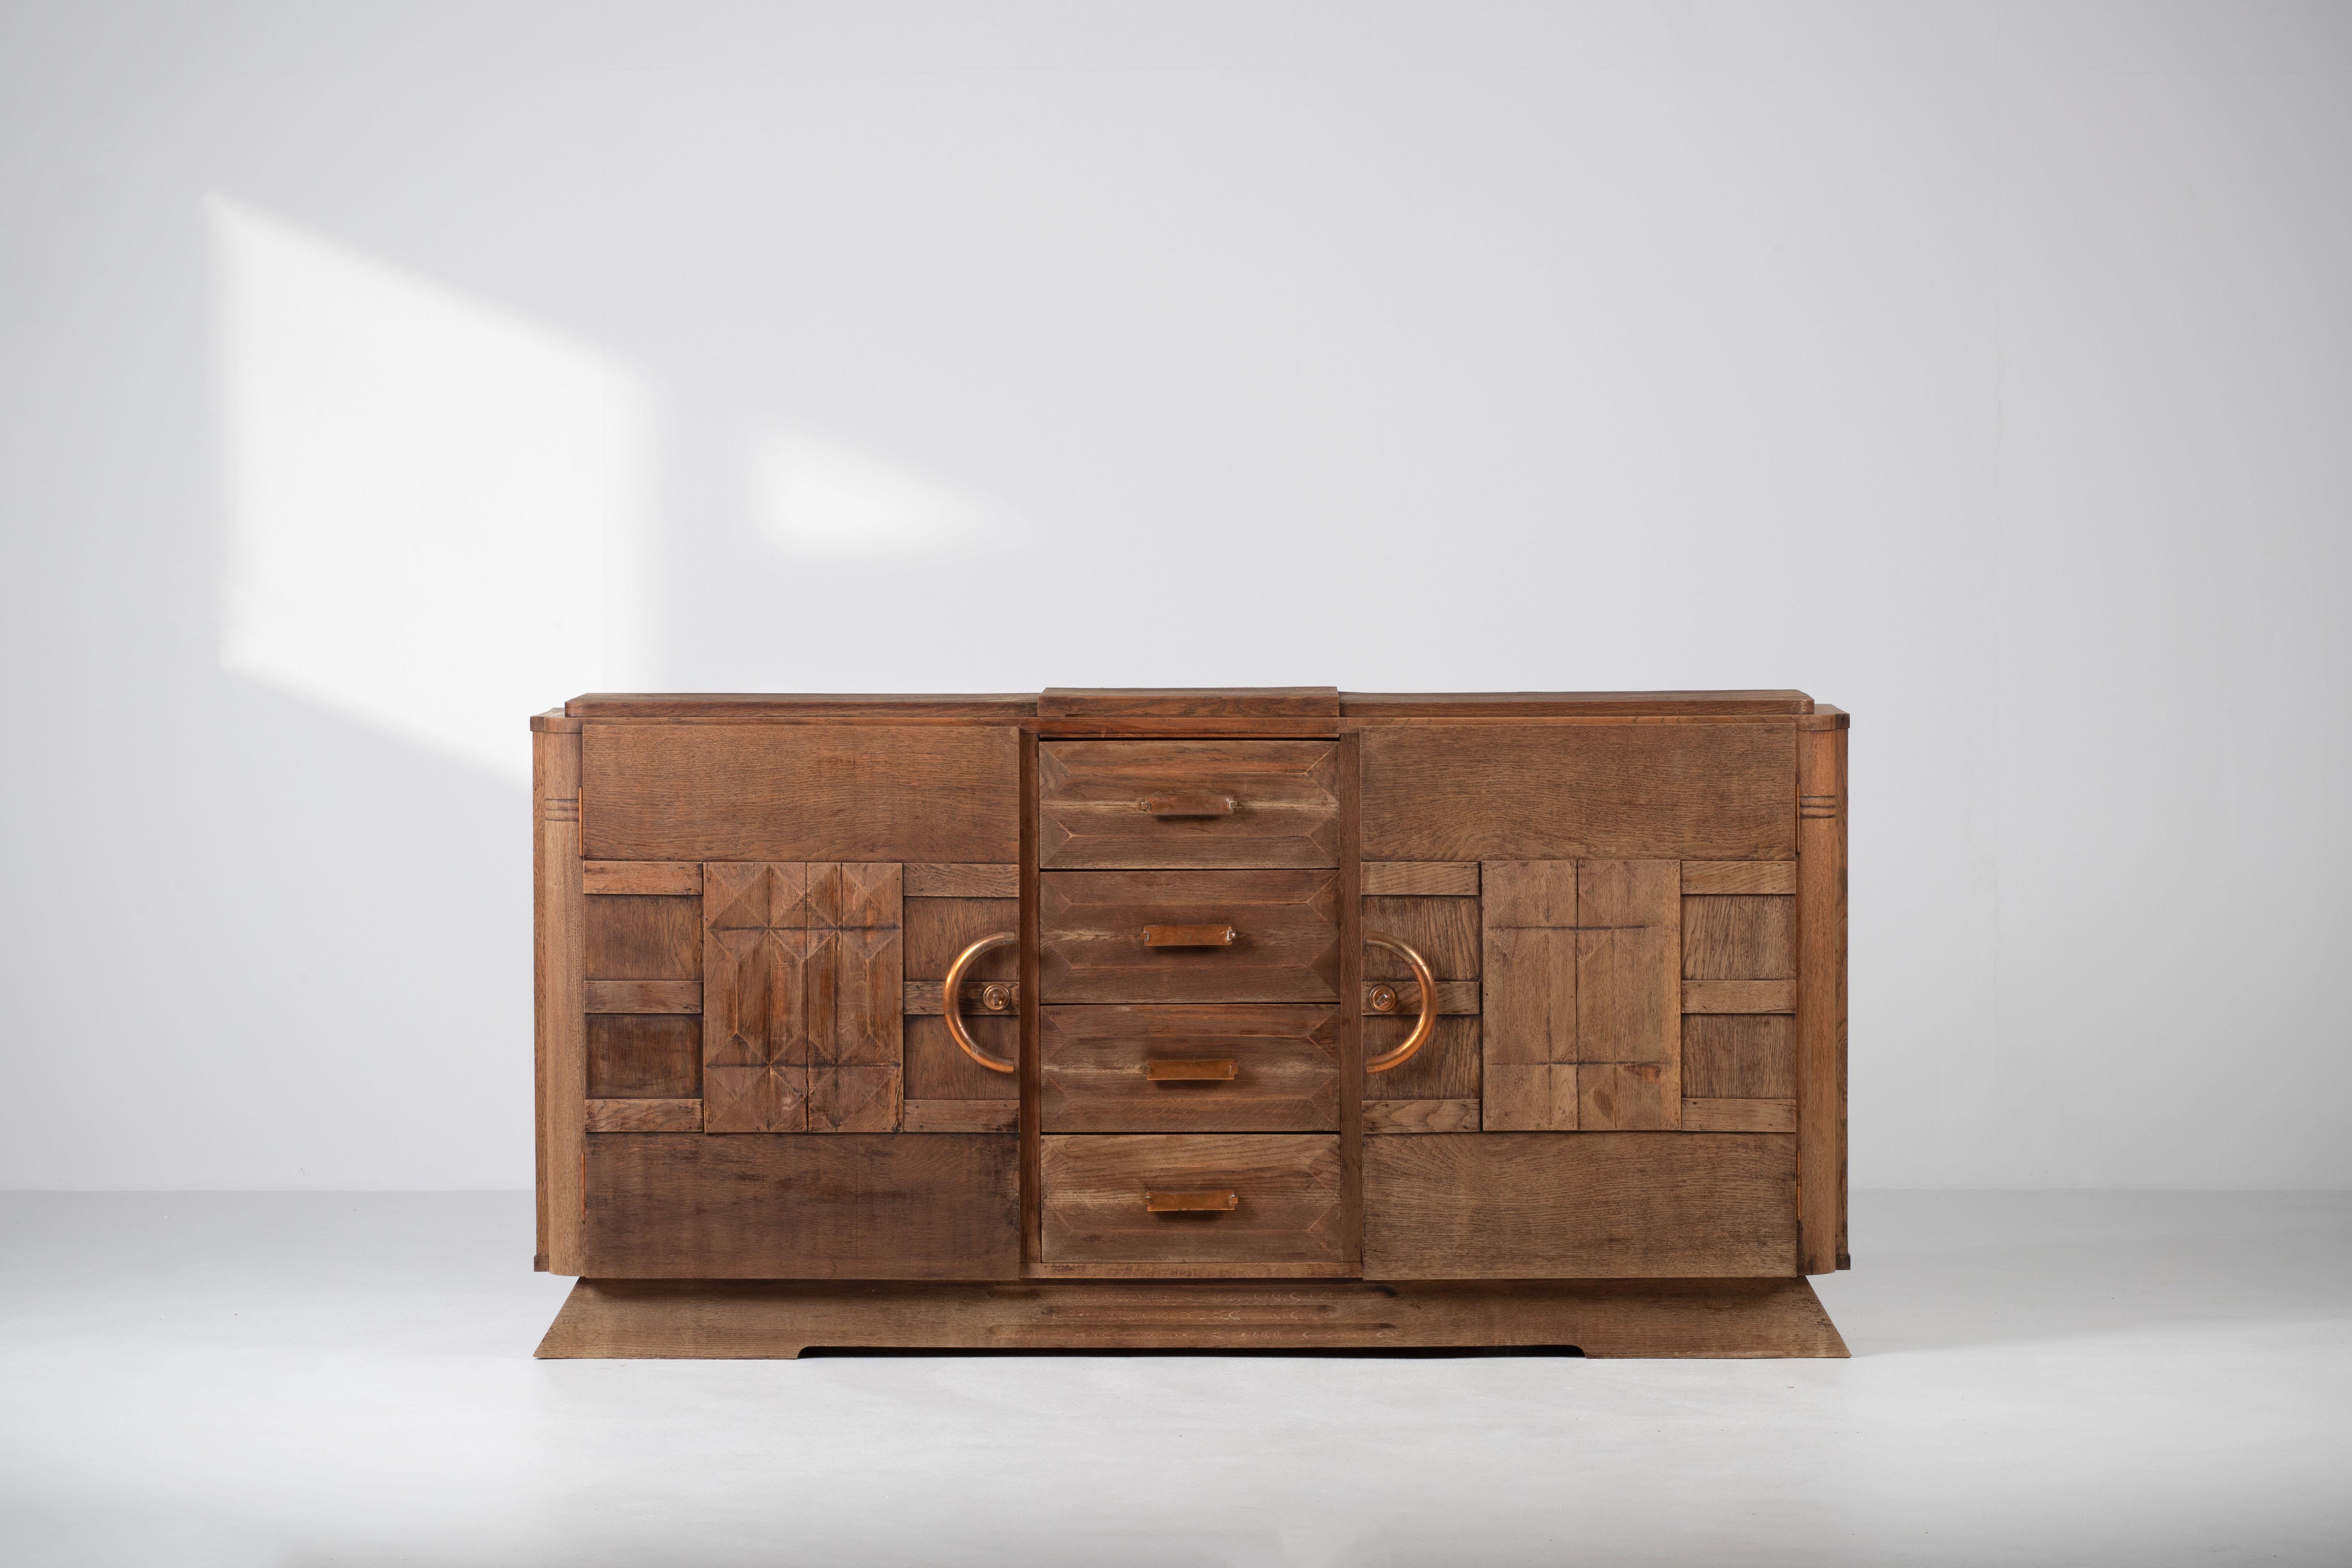 Credenza, solid oak, France, 1940s.
Large Art Deco Brutalist sideboard. 
The credenza consists of four central drawers and two storage facilities and covered with very detailed designed doors. 
The refined wooden structures on the doors create a